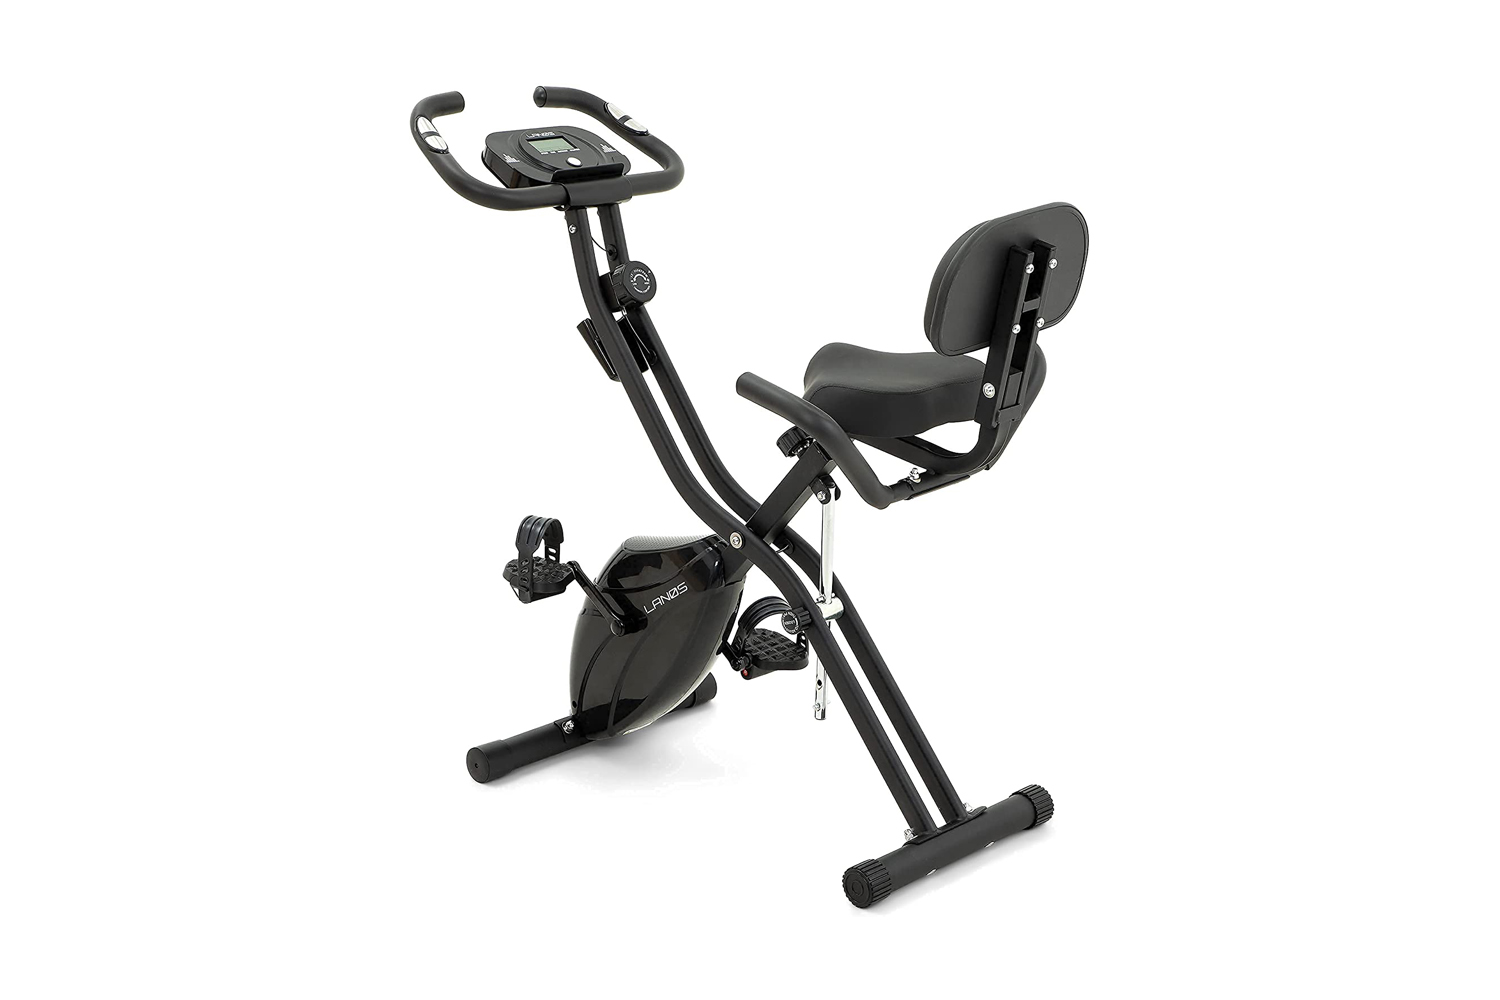 The 7 Best Folding Exercise Bikes and Stationary Bikes - The Manual